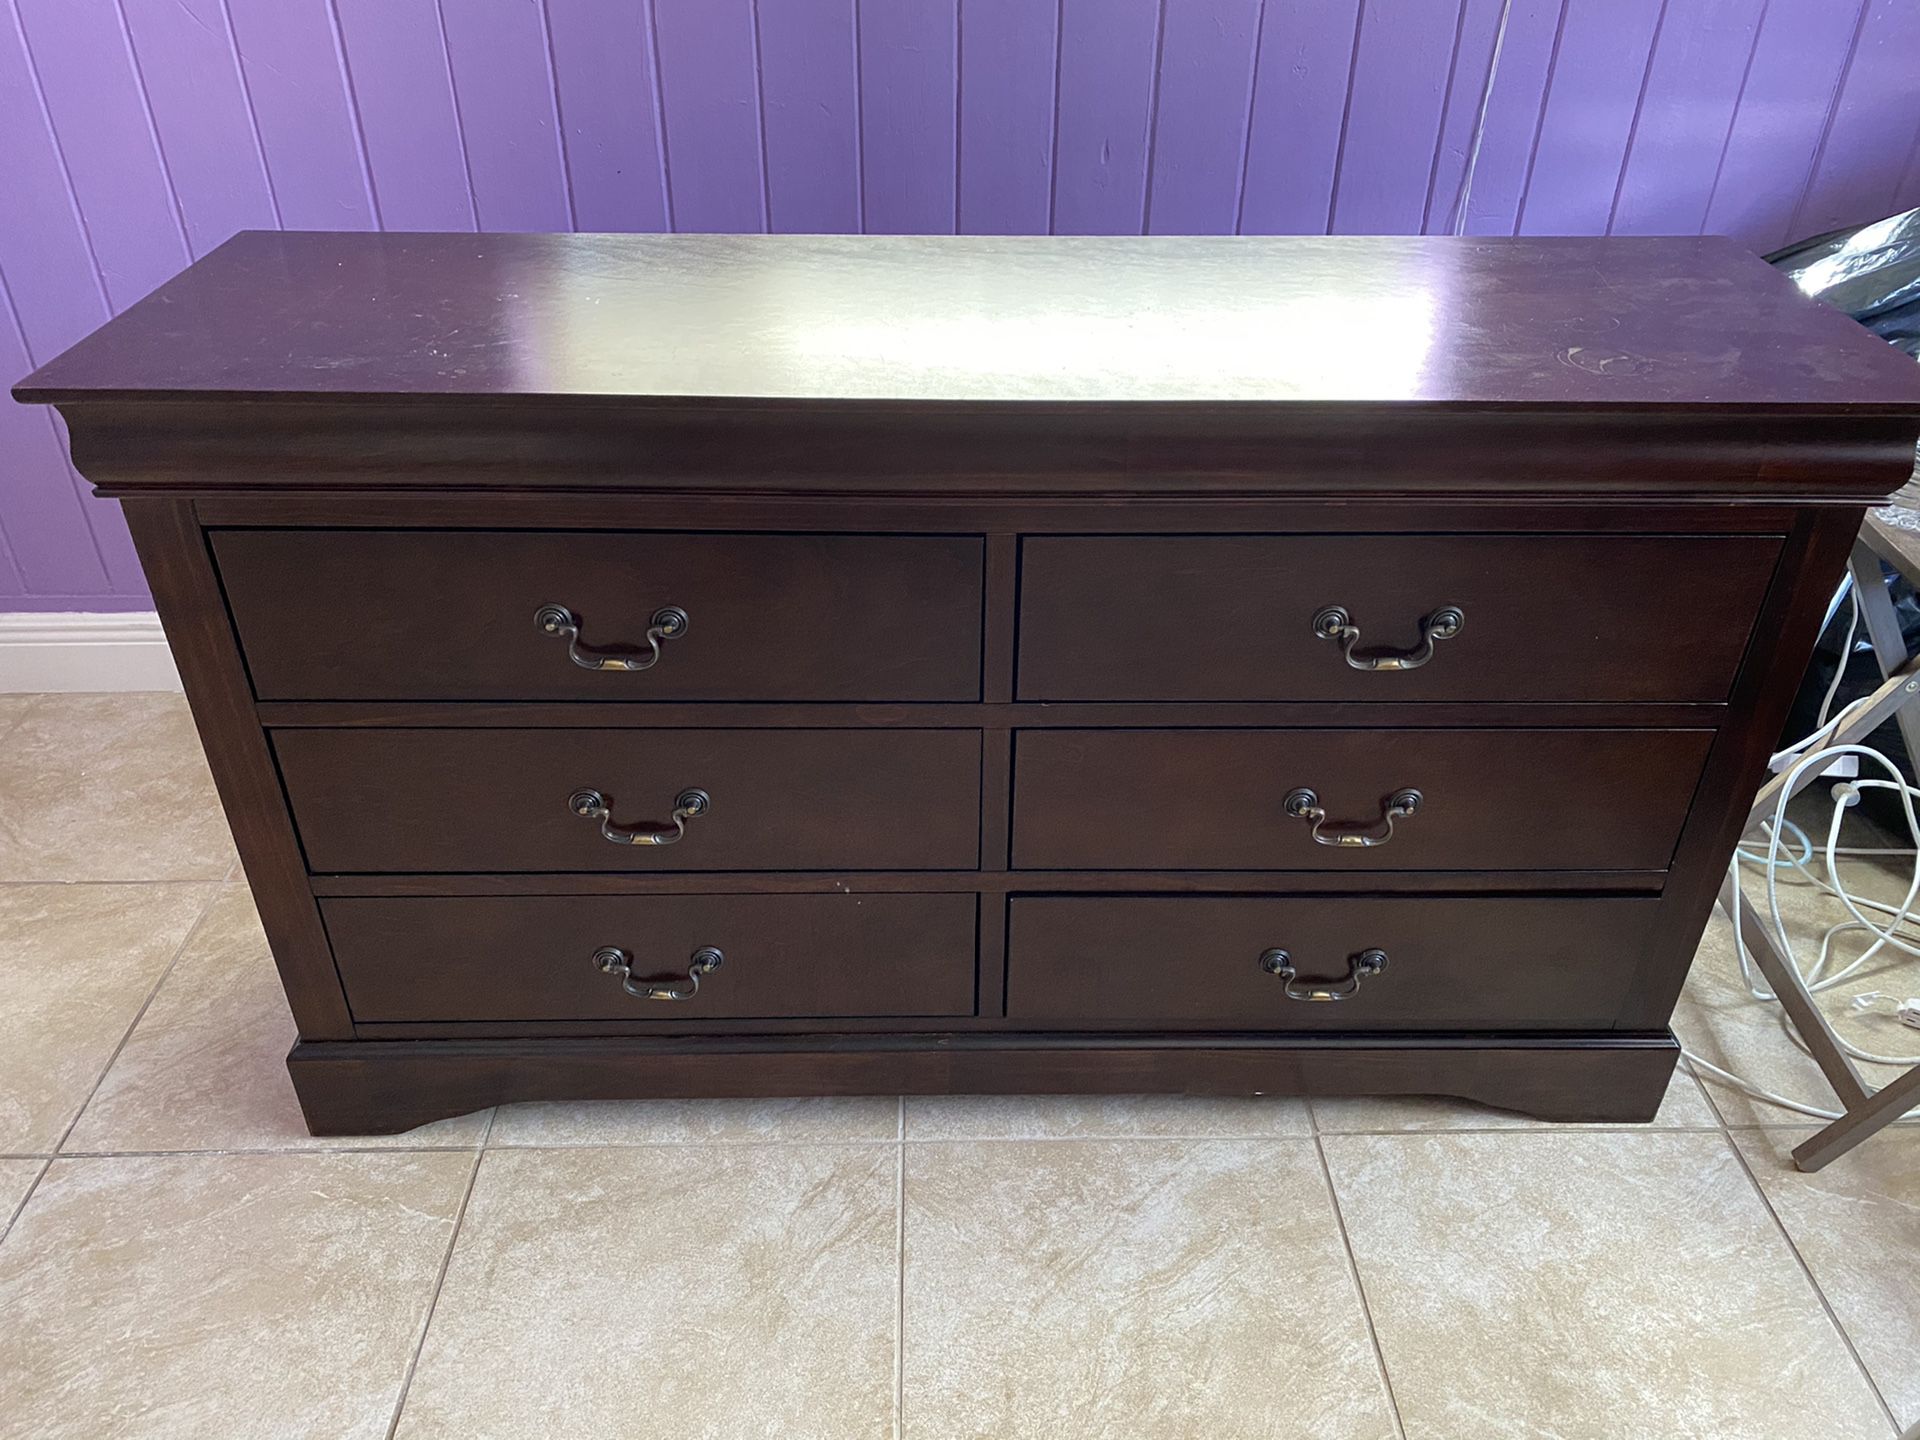 6 drawer dresser. Barely used. Great condition. Must go.